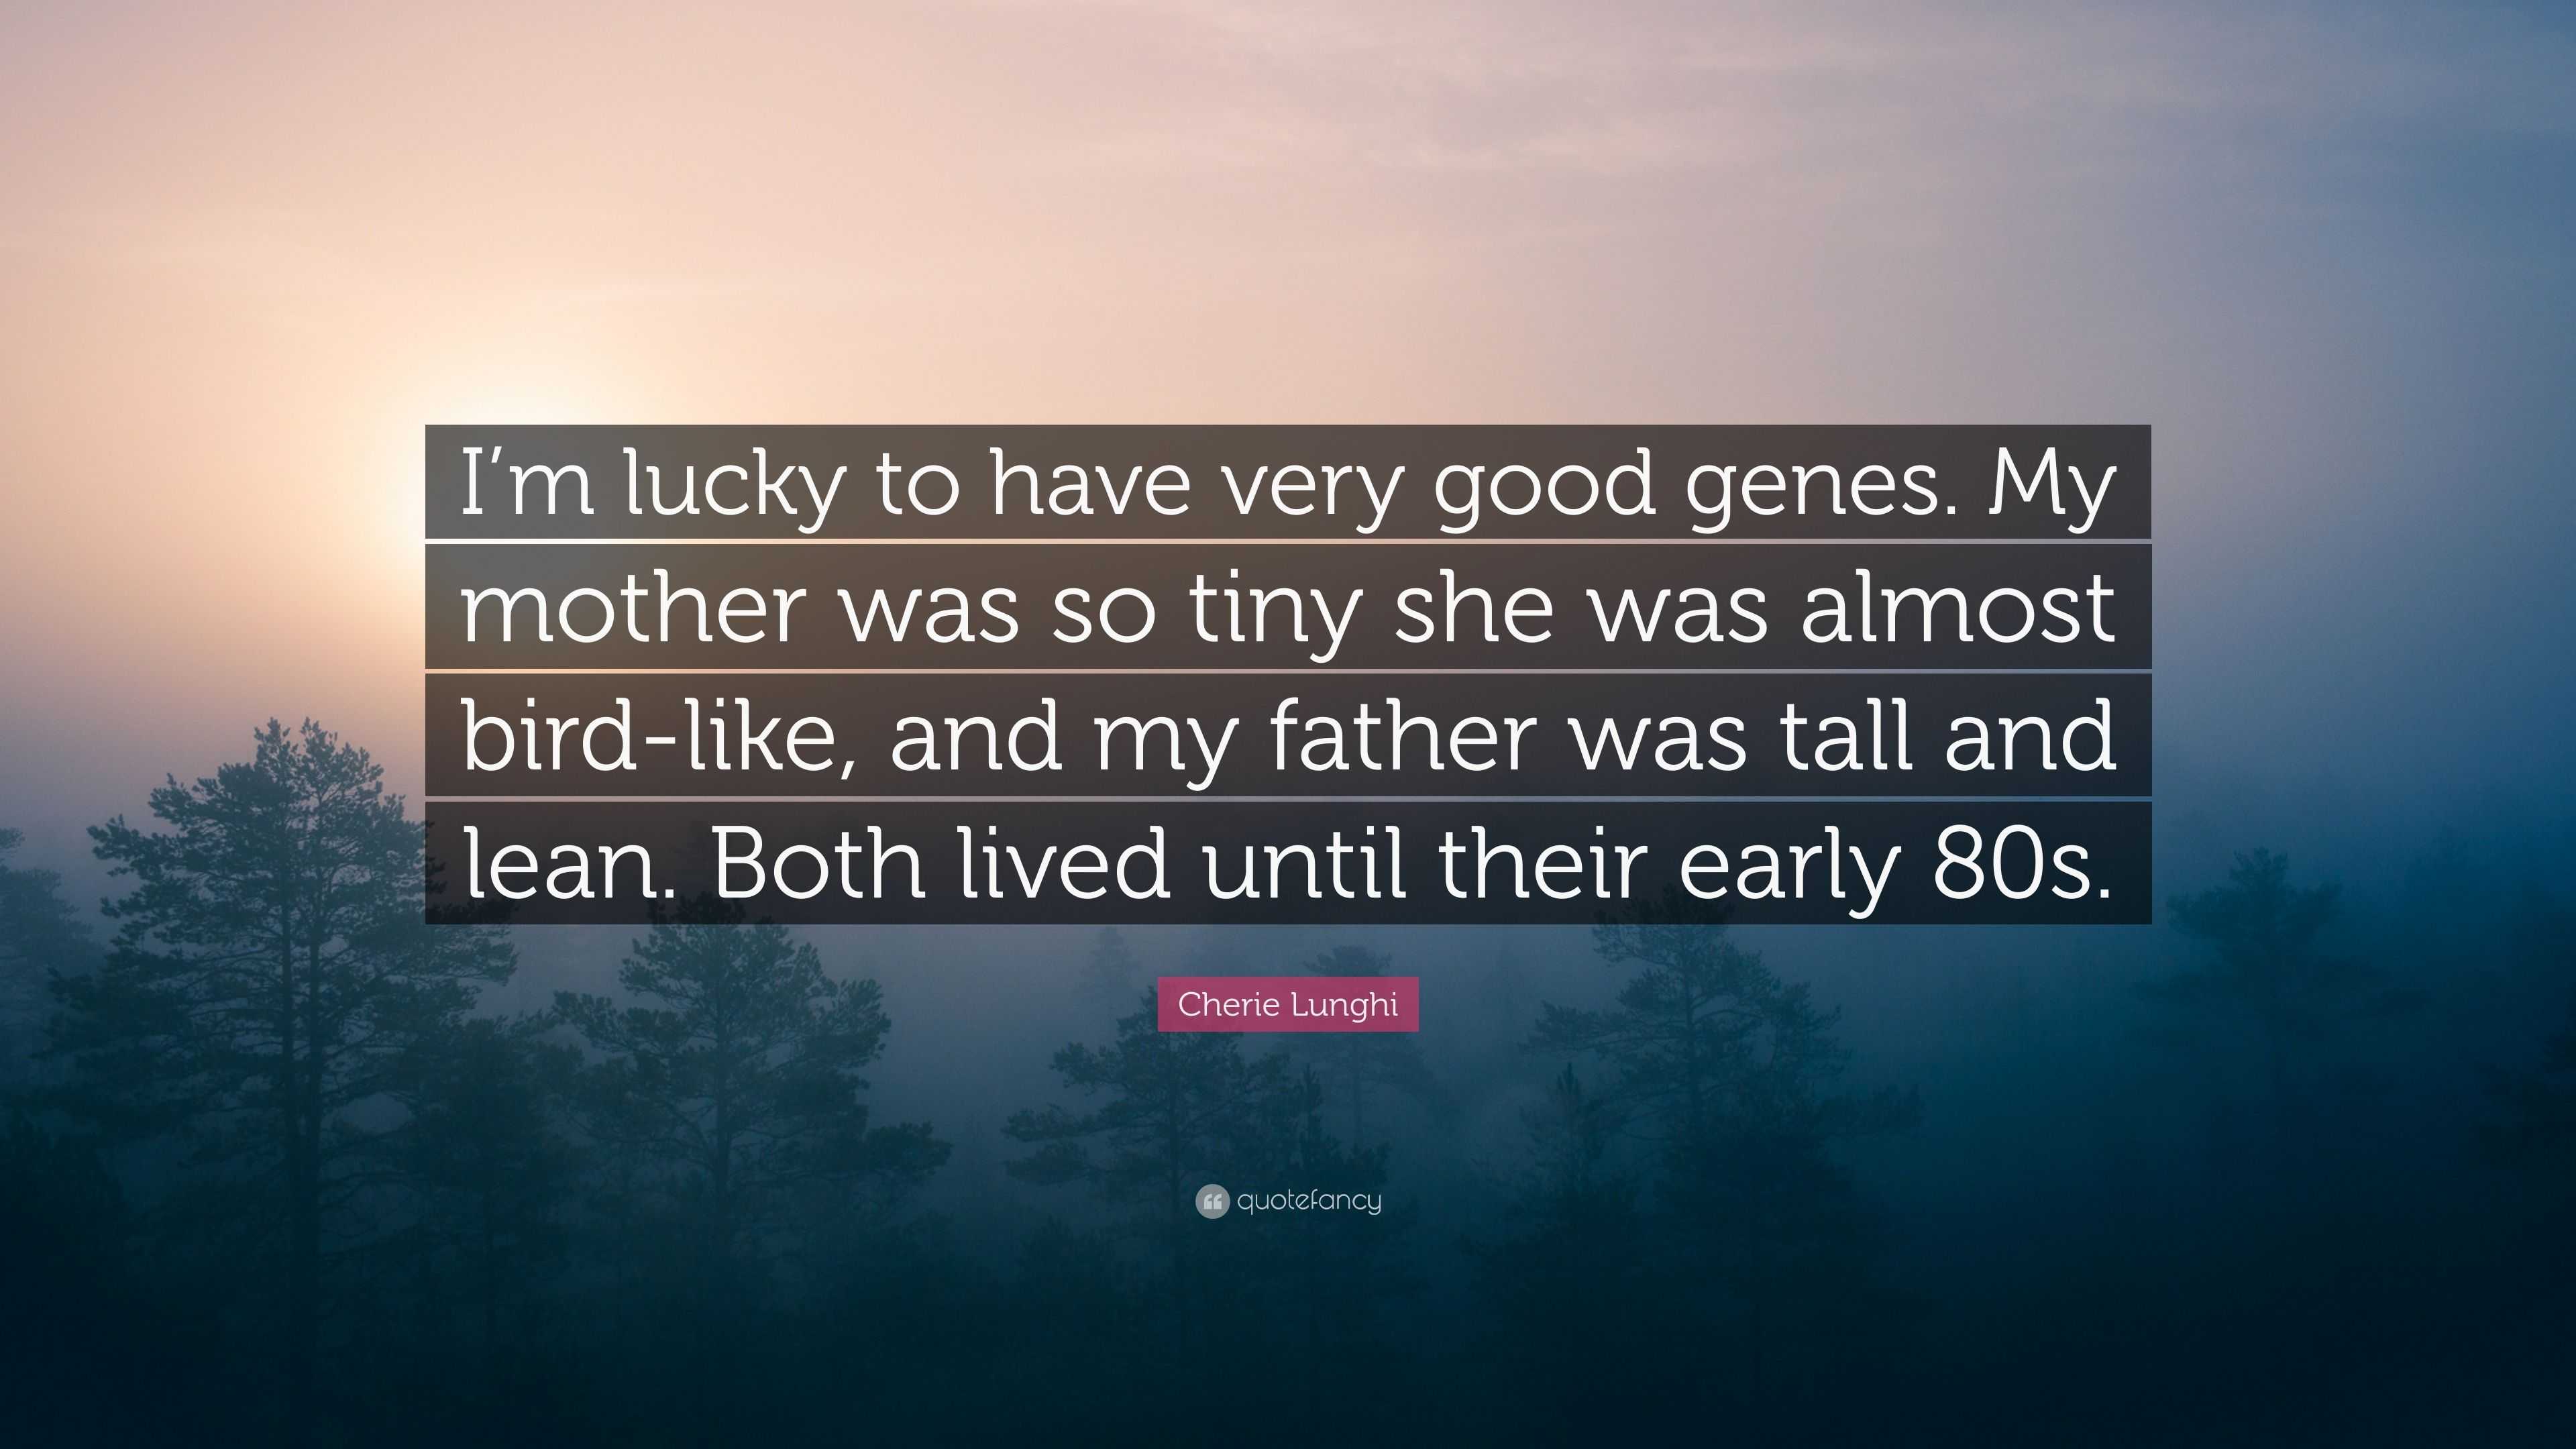 Cherie Lunghi Quote: “I'm lucky to have very good genes. My mother was so  tiny she was almost bird-like, and my father was tall and lean. Both”